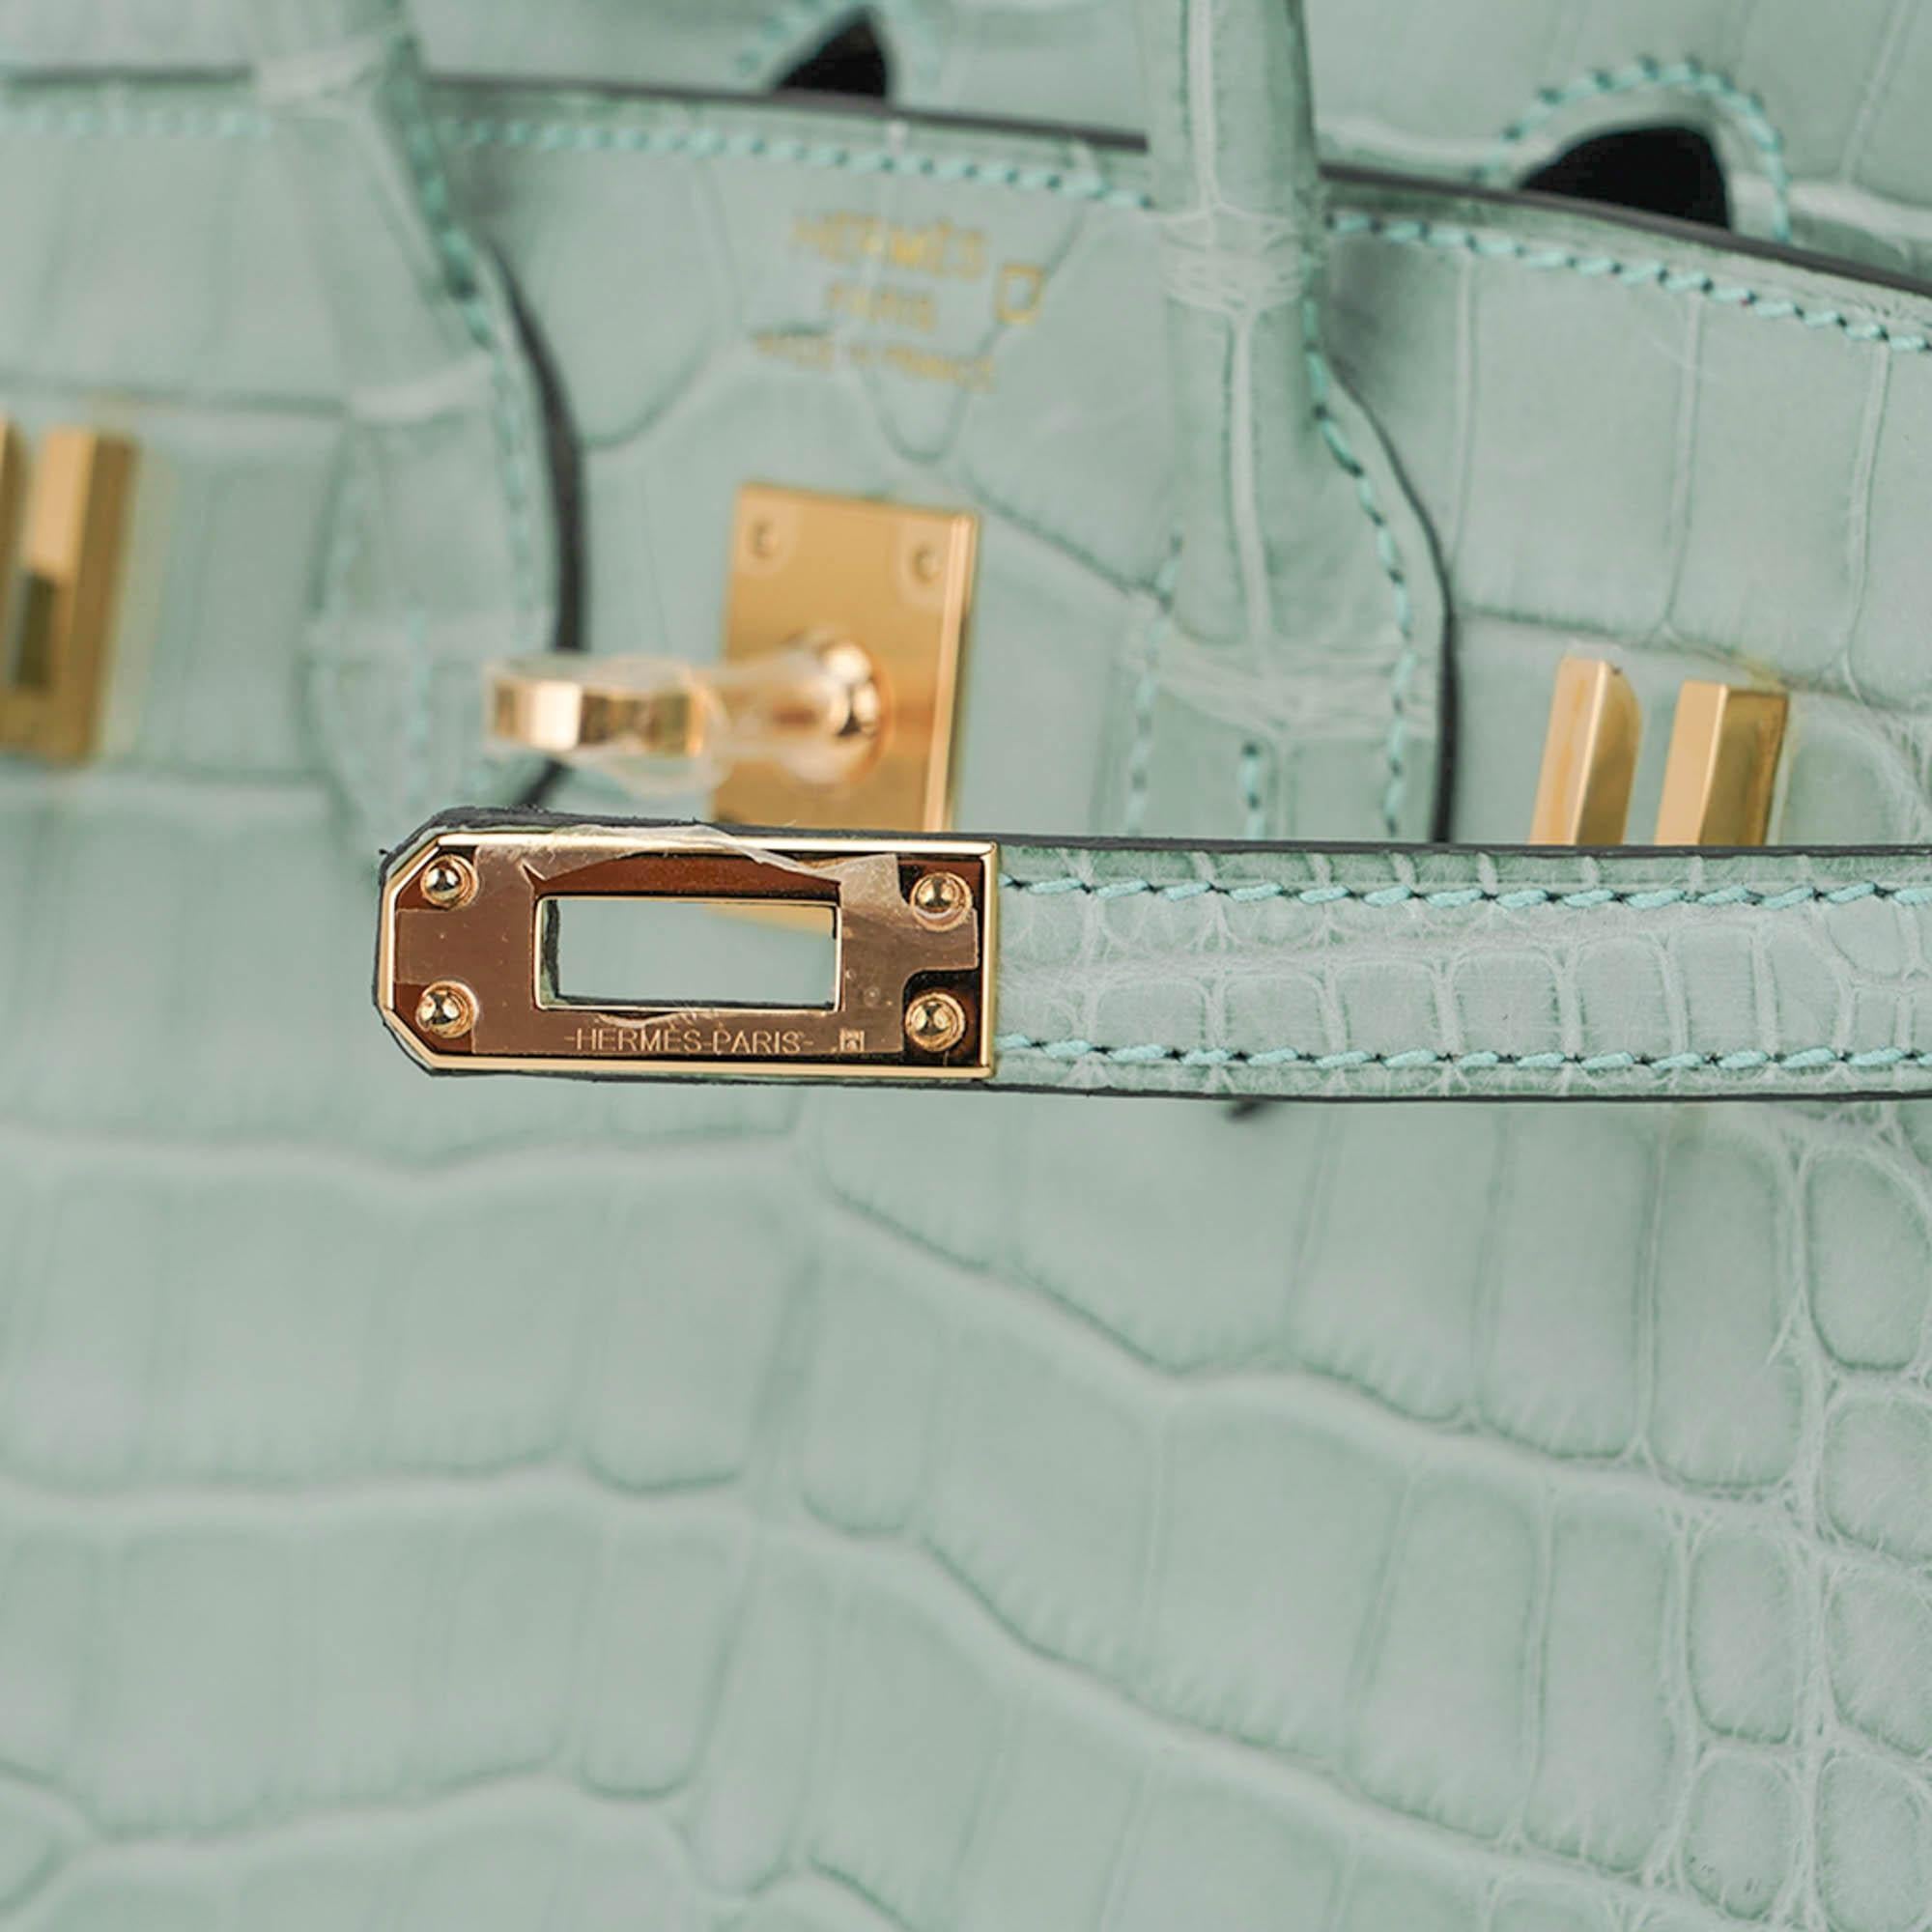 Hermes Birkin 20 Sellier Vert D'Eau Matte Alligator Limited Edition Bag In New Condition For Sale In Miami, FL